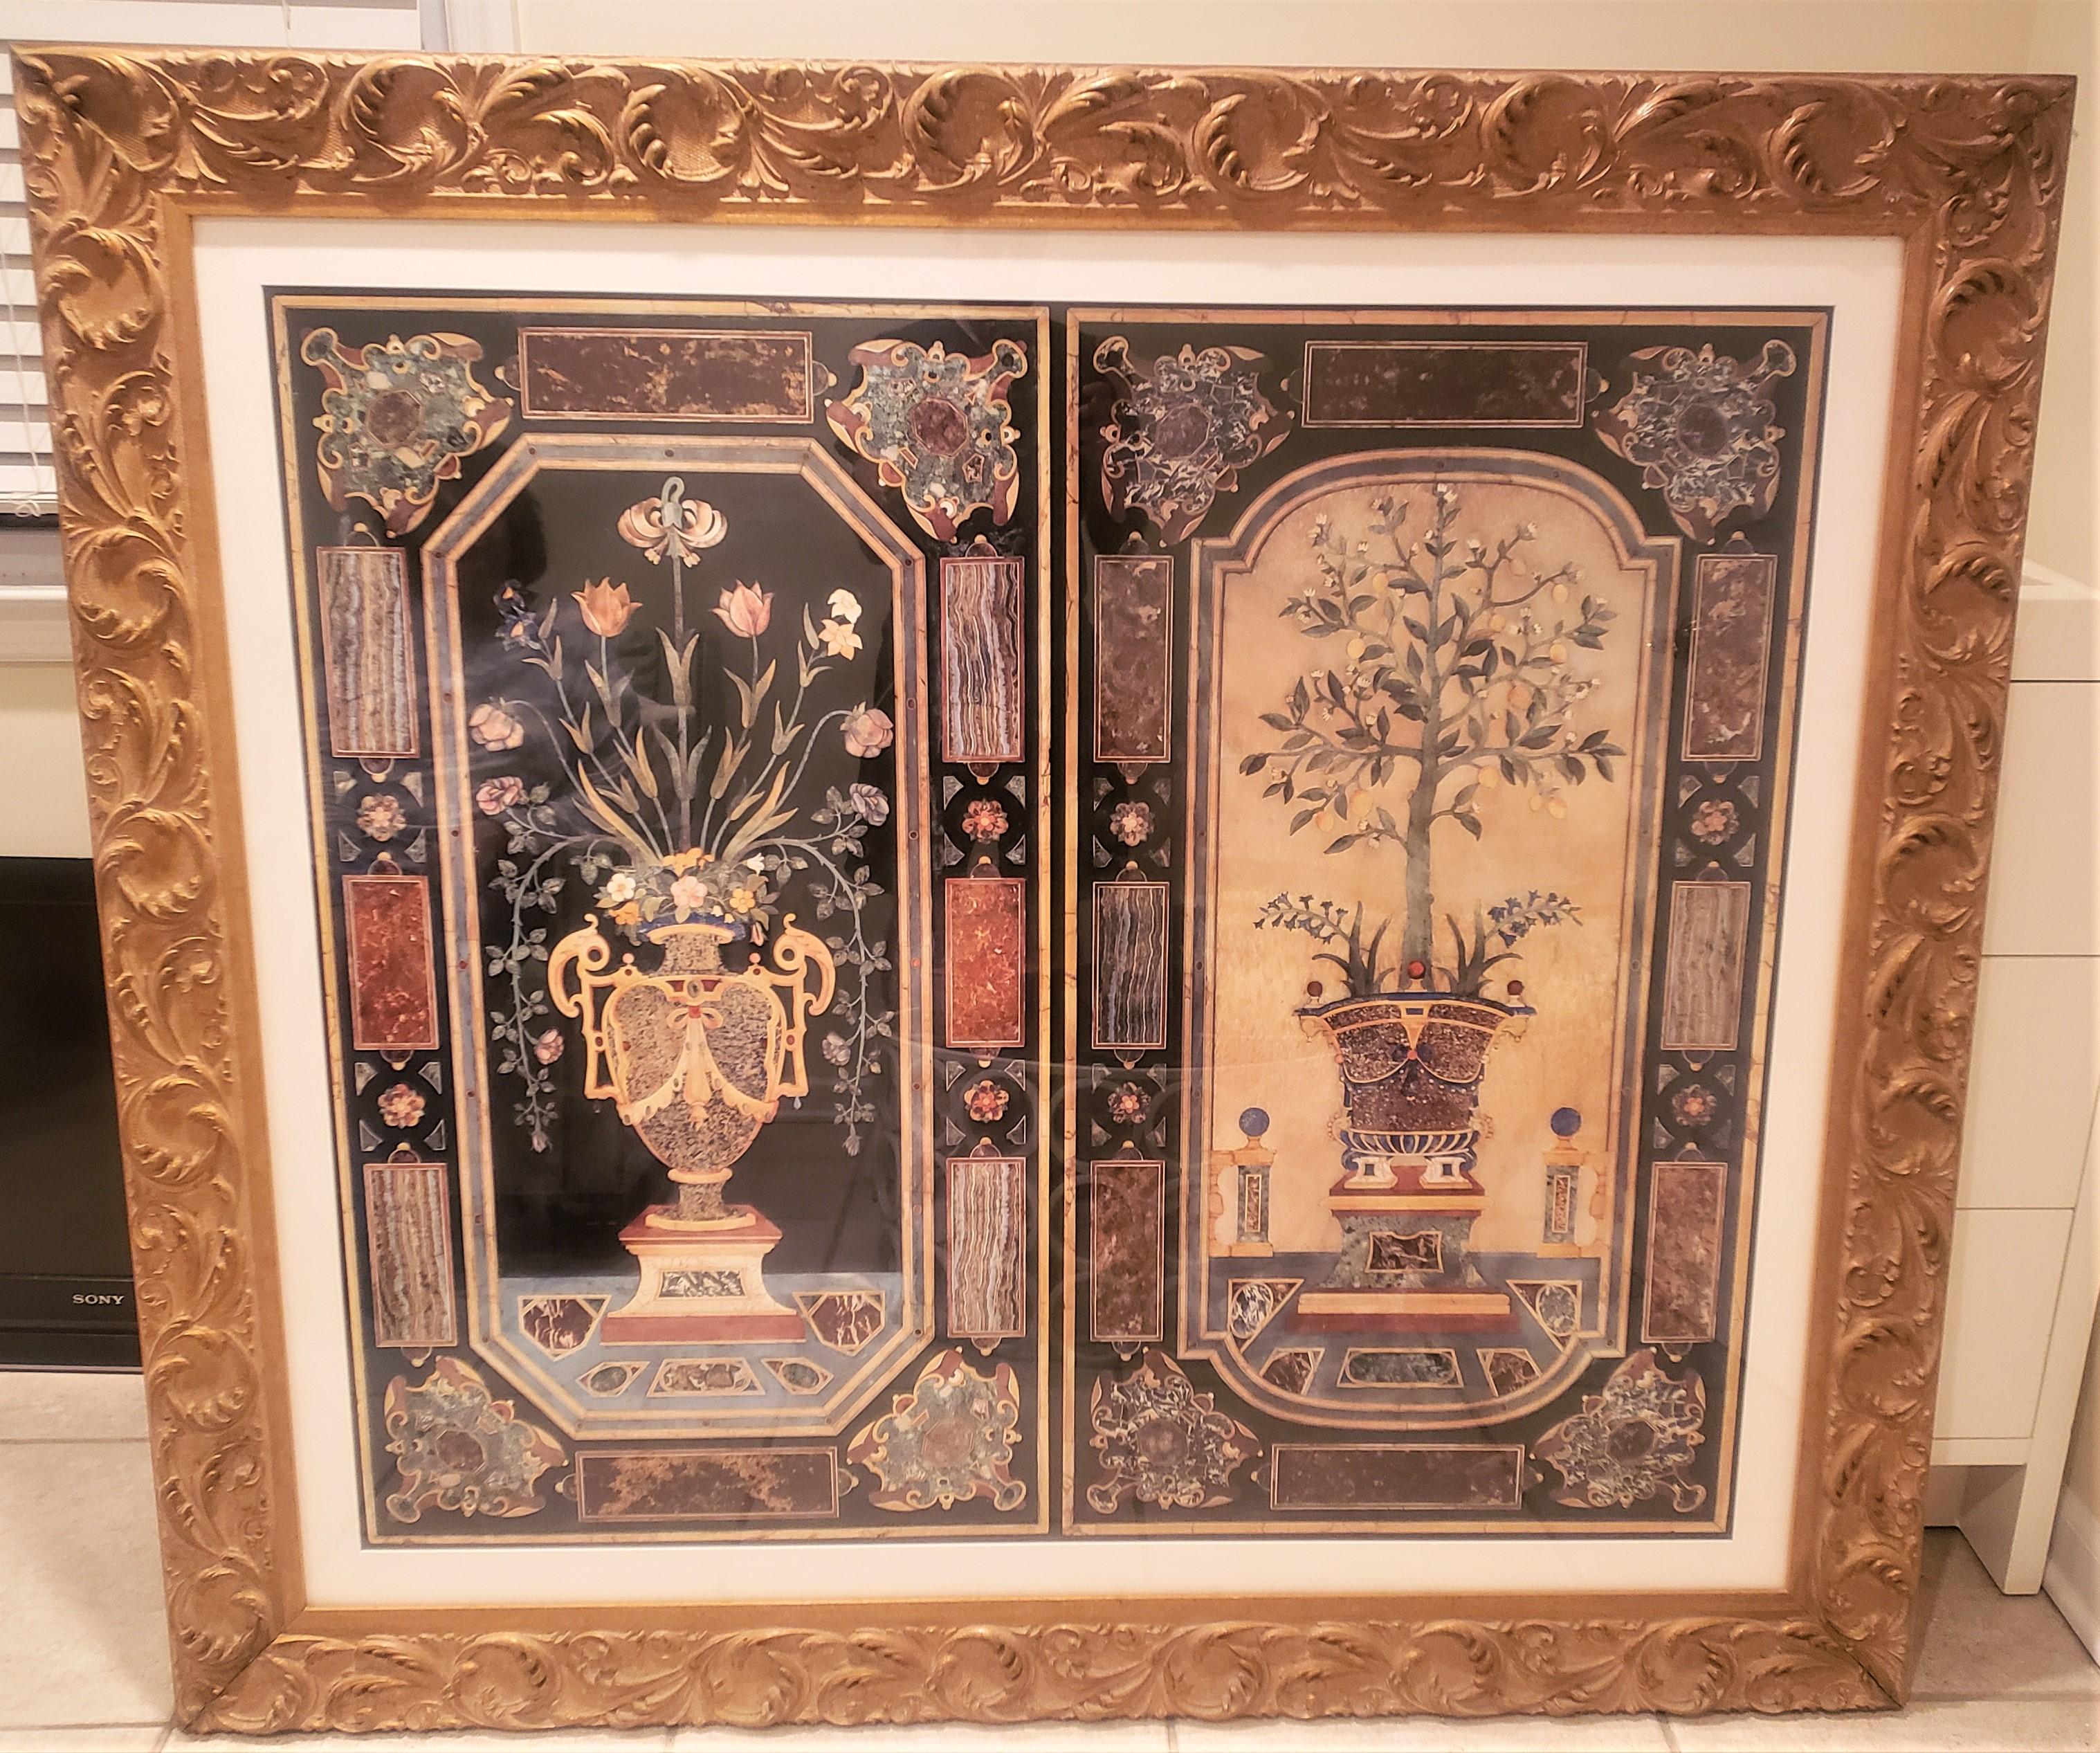 The Following Item we are Offering is A RARE EXQUISITE Framed Inlaid Design Italian Lithograph Print. Showcasing a Framed in a Beautiful Fine Custom Gold Leaf Frame with High Resolution Glass. 

Framed Measurements: 56